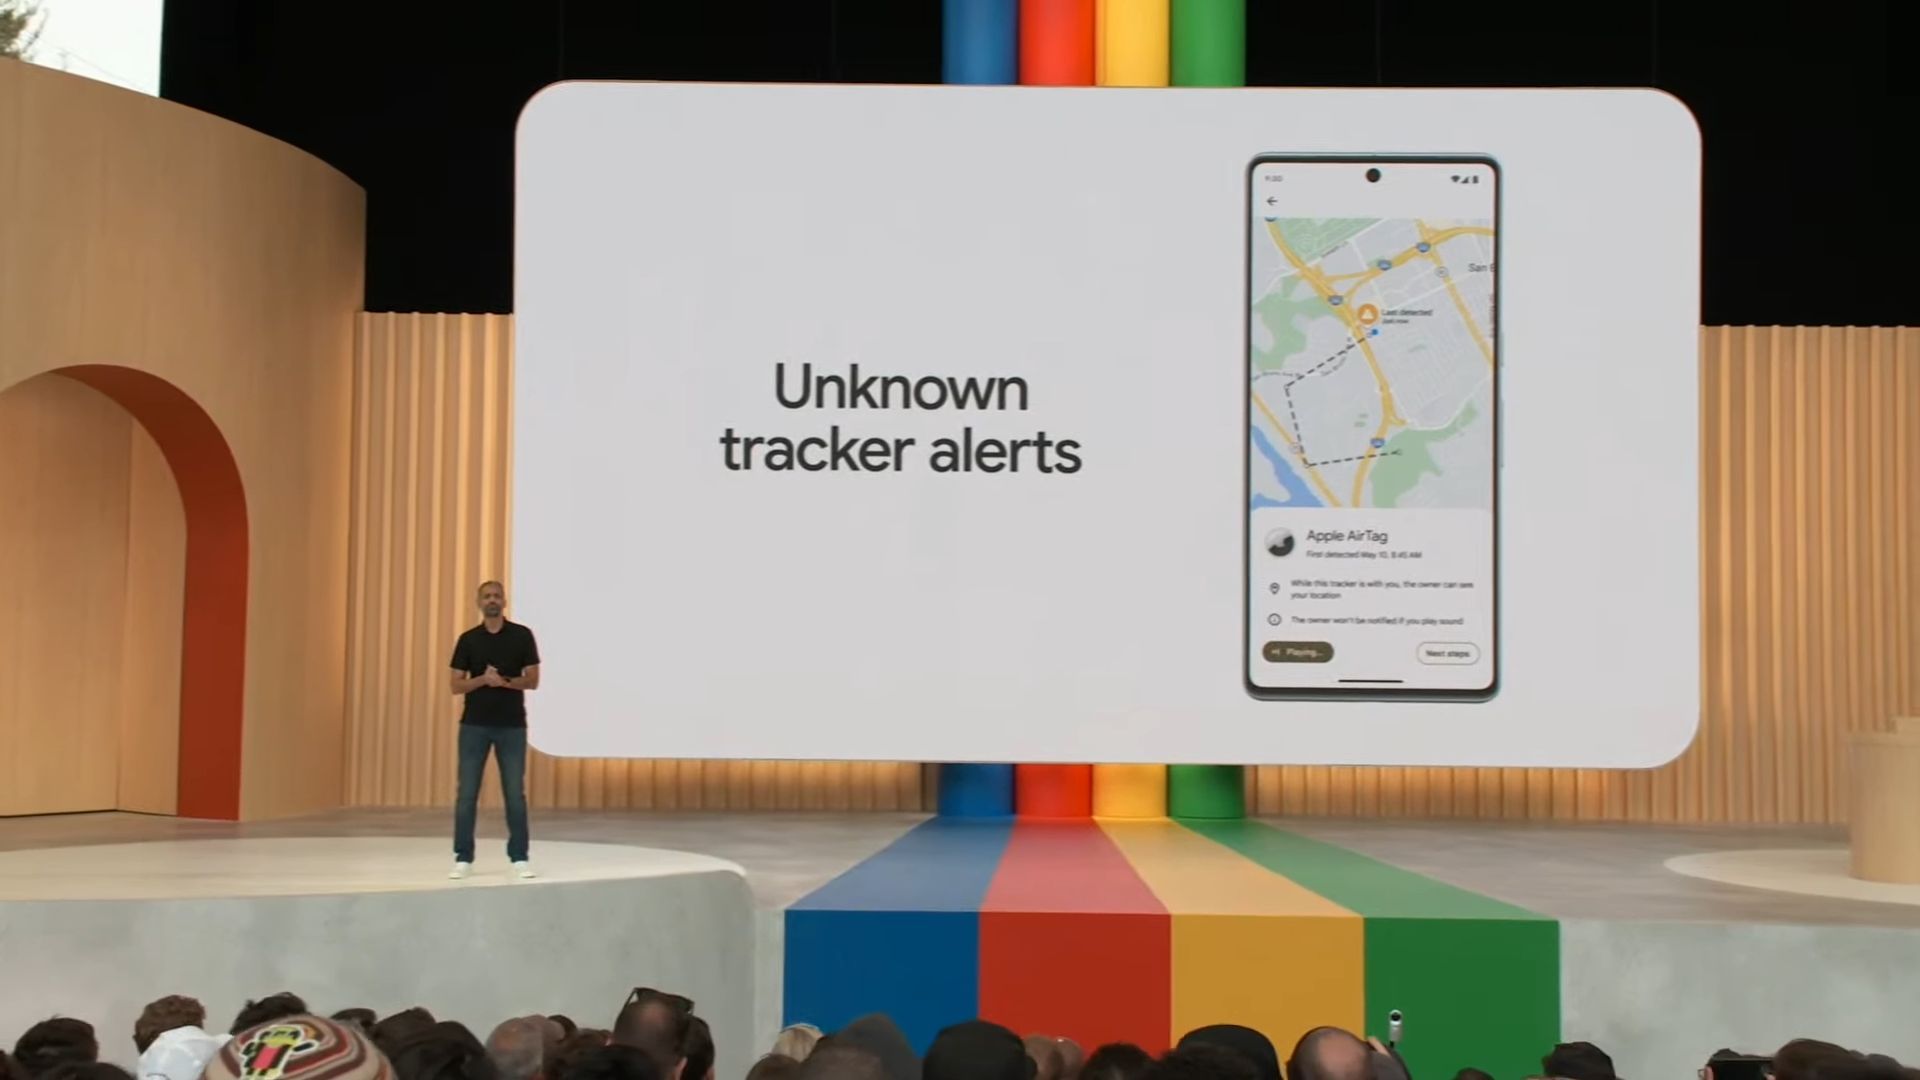 Android's new 'unknown tracker alerts' can help warn users of rogue Apple  AirTags